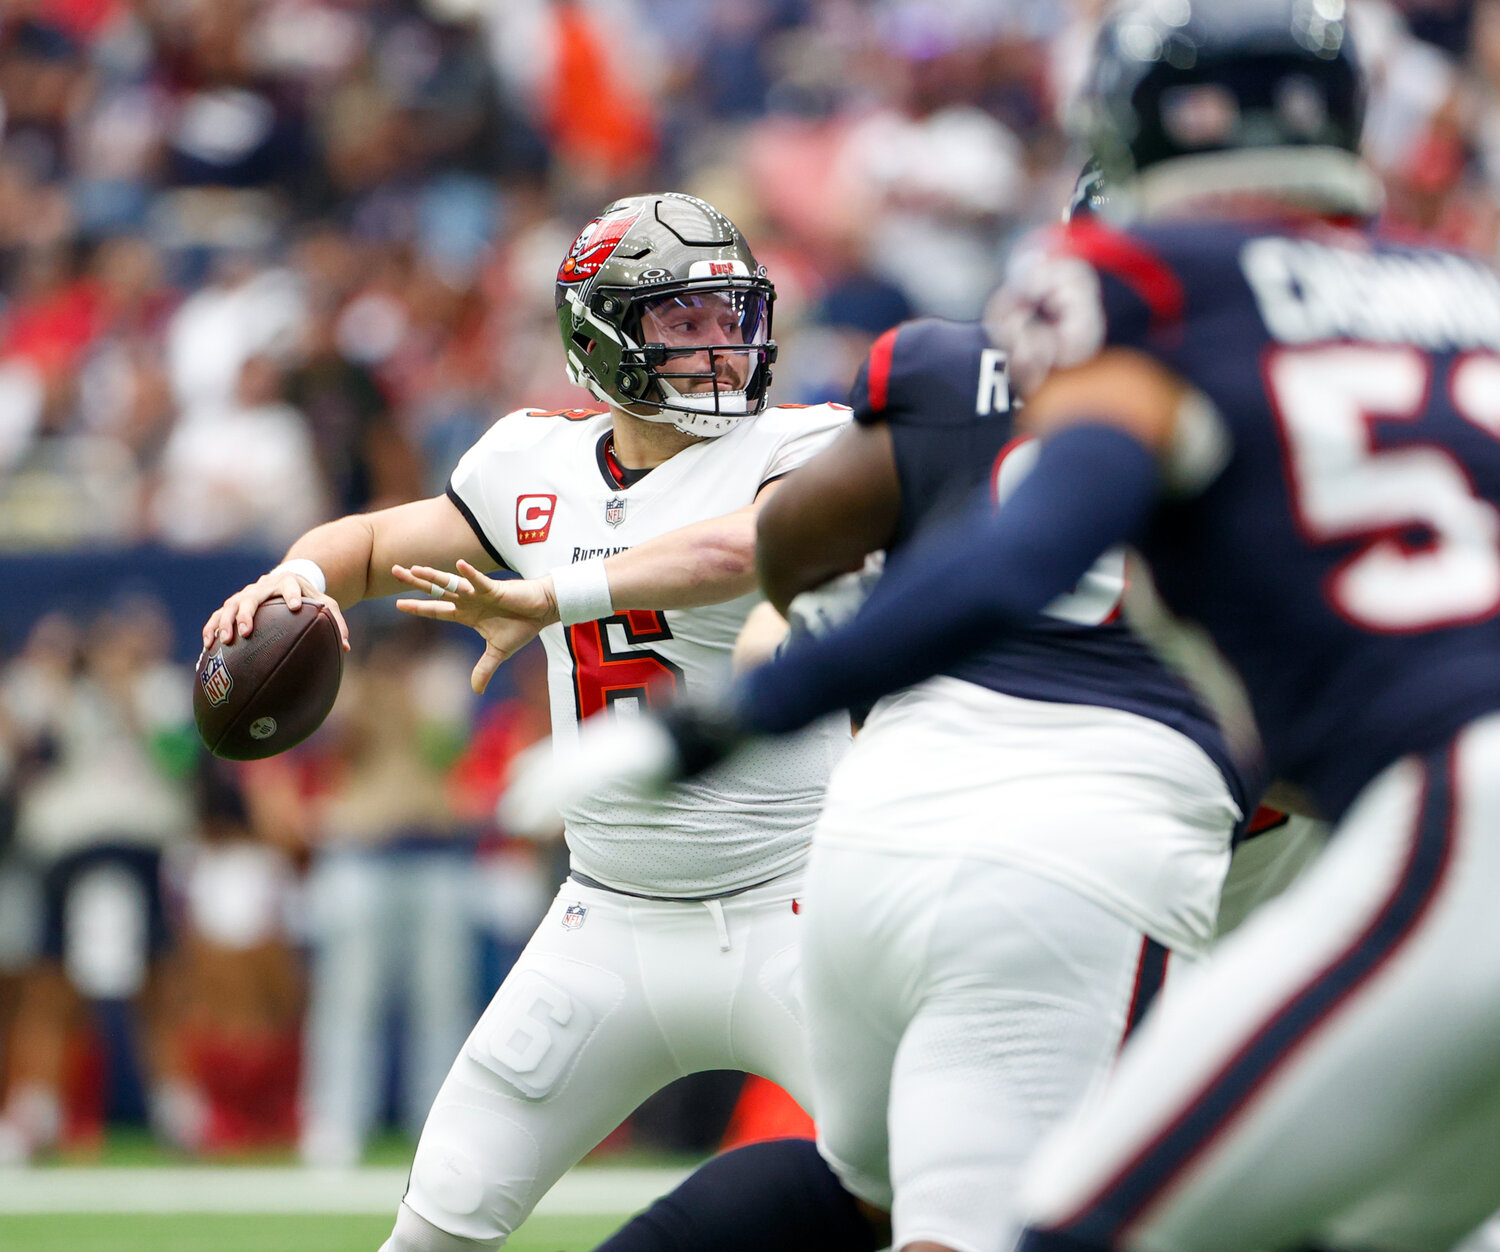 Buccaneers quarterback Baker Mayfield (6) passes the ball during an NFL game between the Houston Texans and the Tampa Bay Buccaneers on November 5, 2023 in Houston.